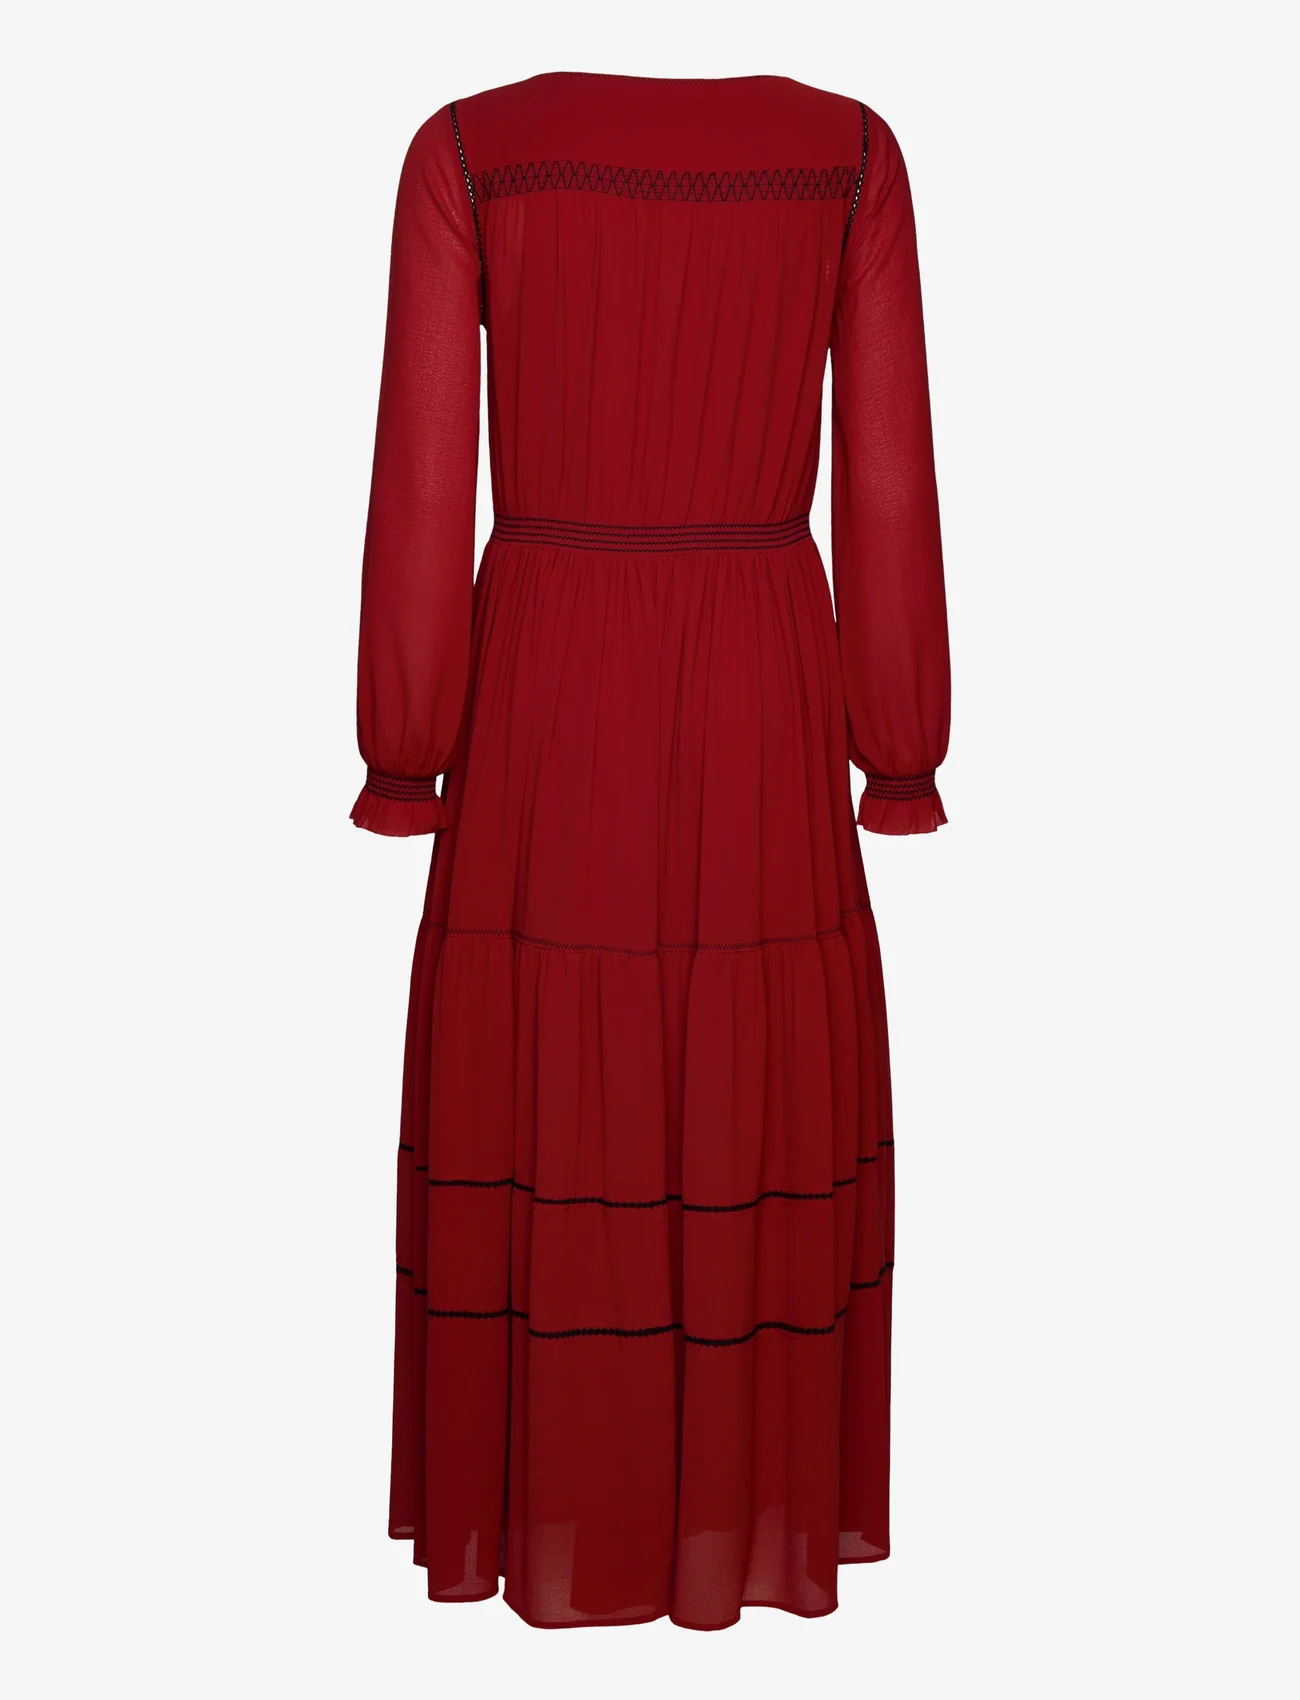 See by Chloé - Dress - maxi dresses - red ochre - 1